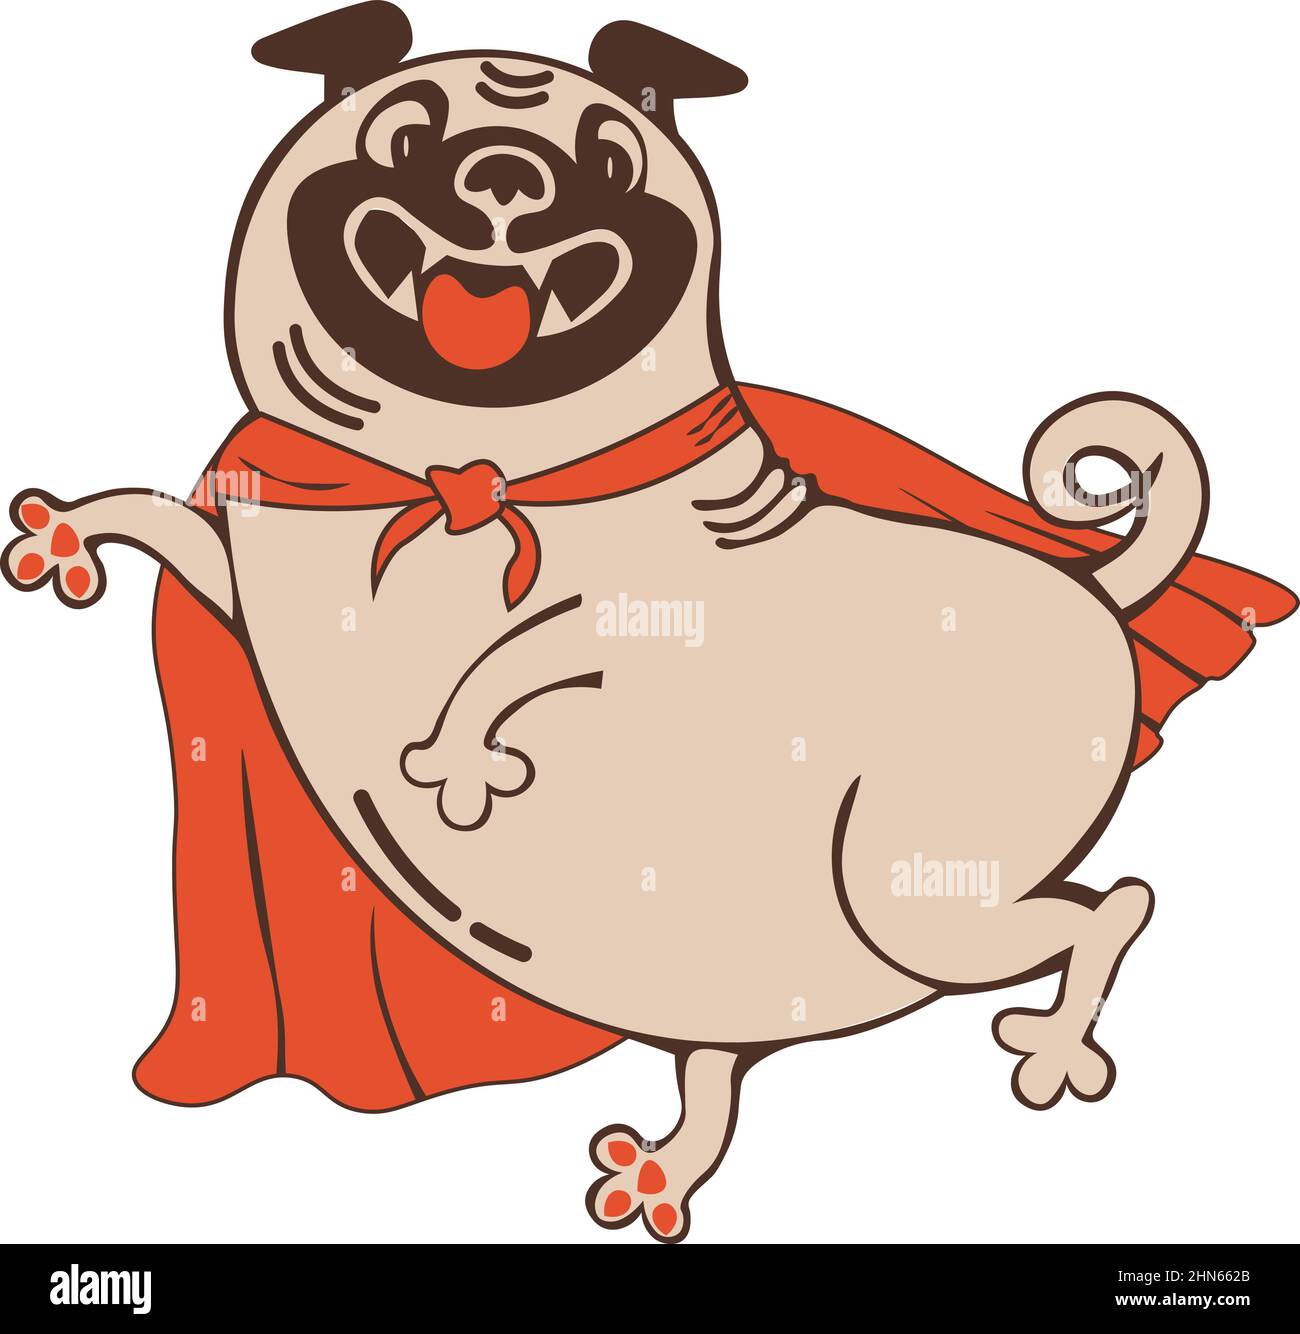 Funny animal character smiling pug in red cloak superhero comic style Stock Vector